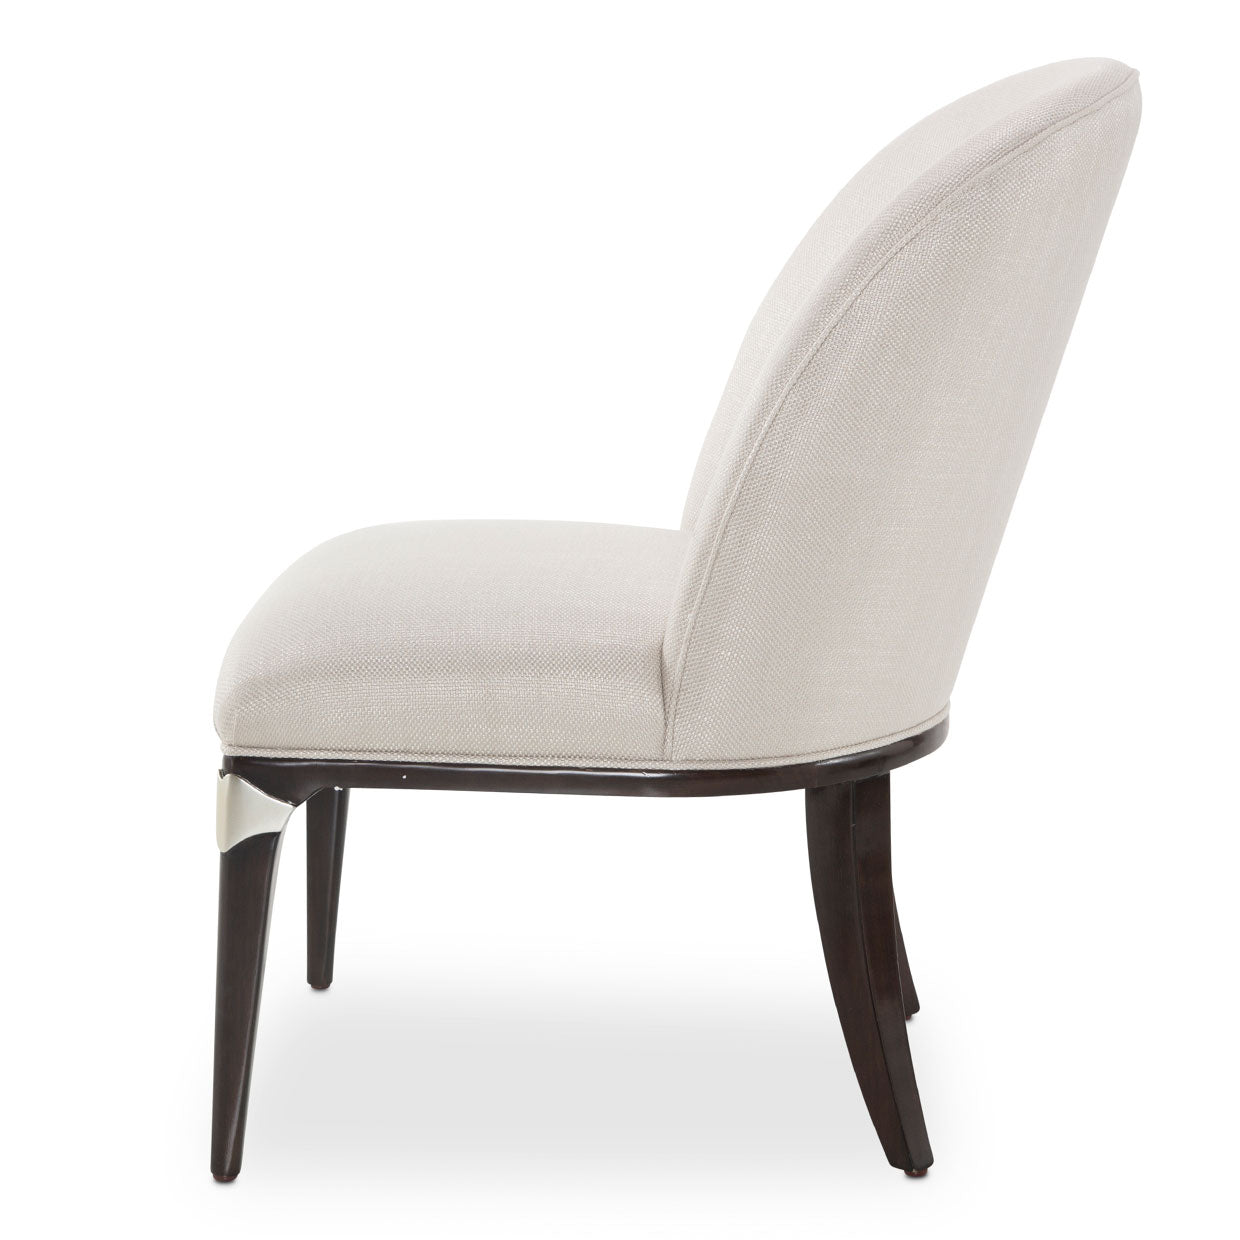 Paris Chic Vanity Desk Chair, Glamorous, Frosted linen seat, Curving shape, Classy, silhouette, Espresso-finished hardwood, Figured Eucalyptus Veneer, Sloping sides, Textured fabric, Frosted linen, Platinum accents, dream art , Michael amini